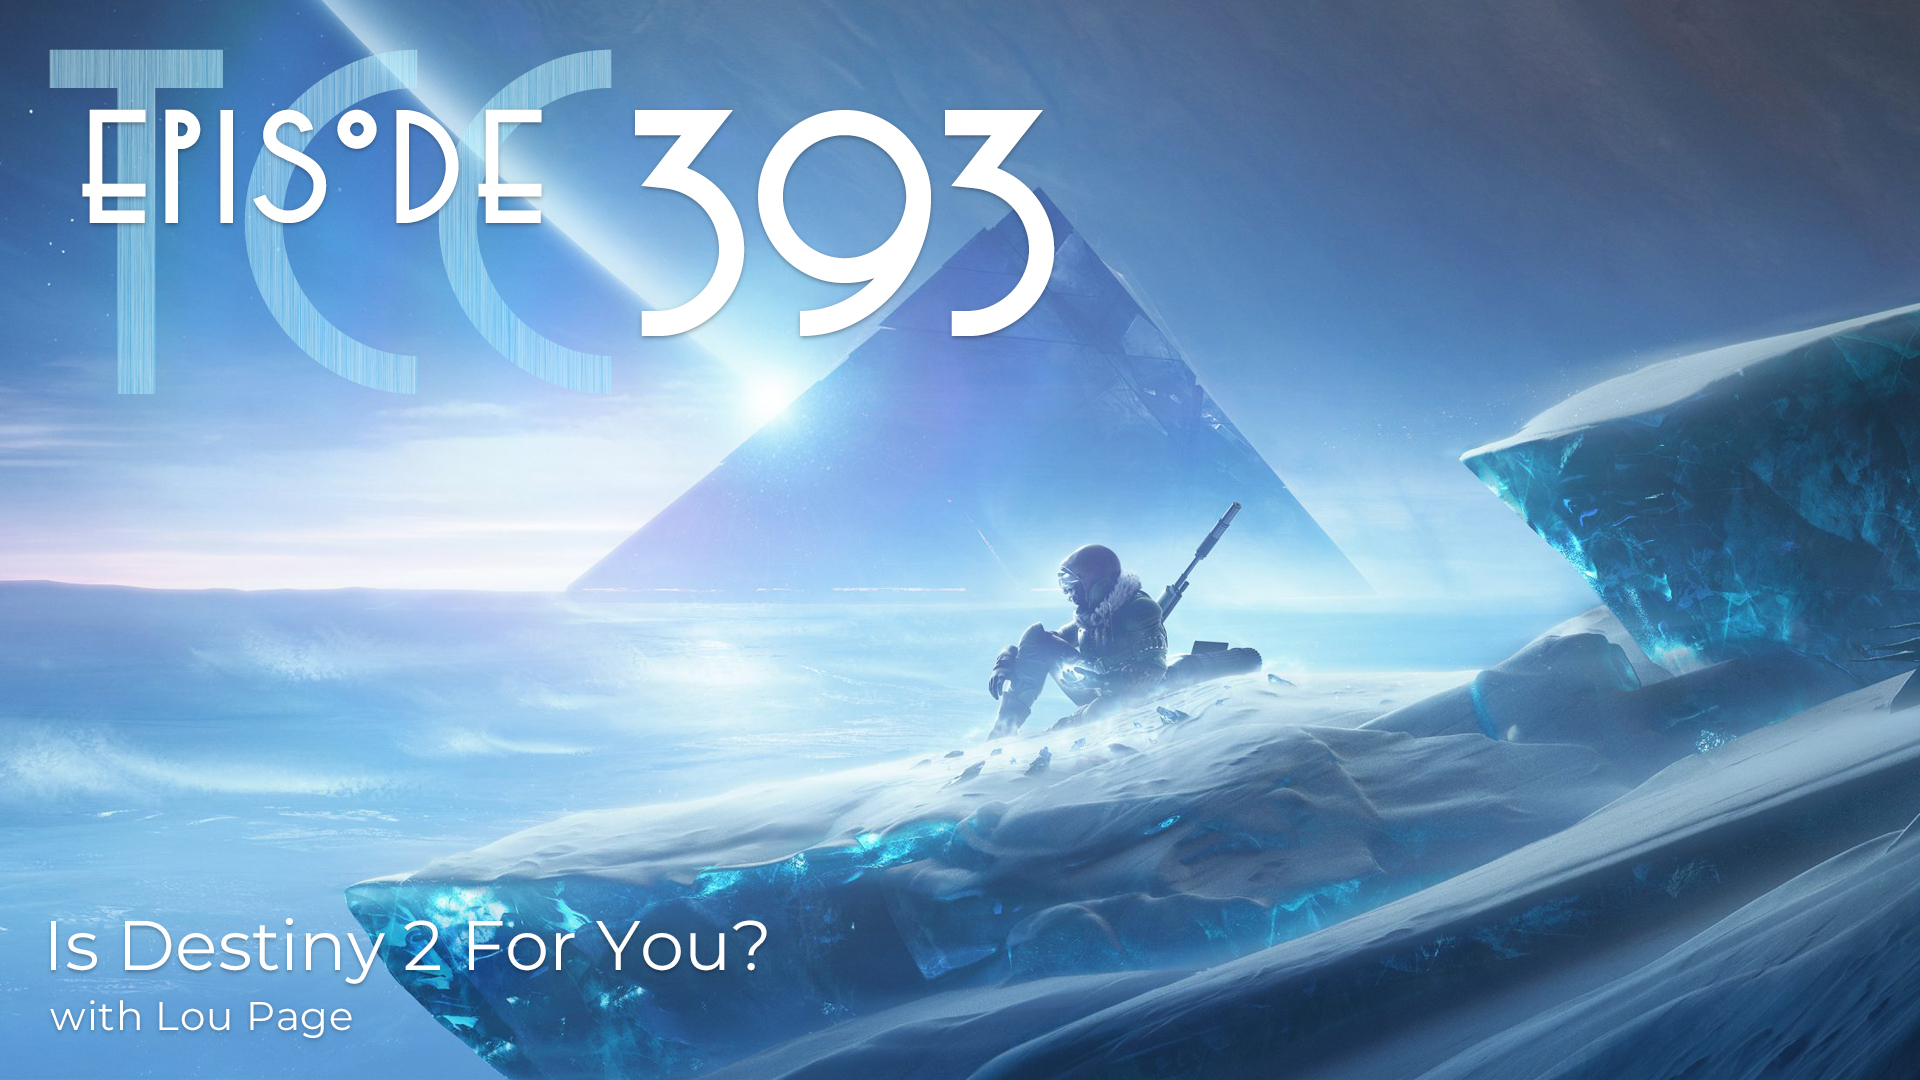 The Citadel Cafe 393: Is Destiny 2 For You?